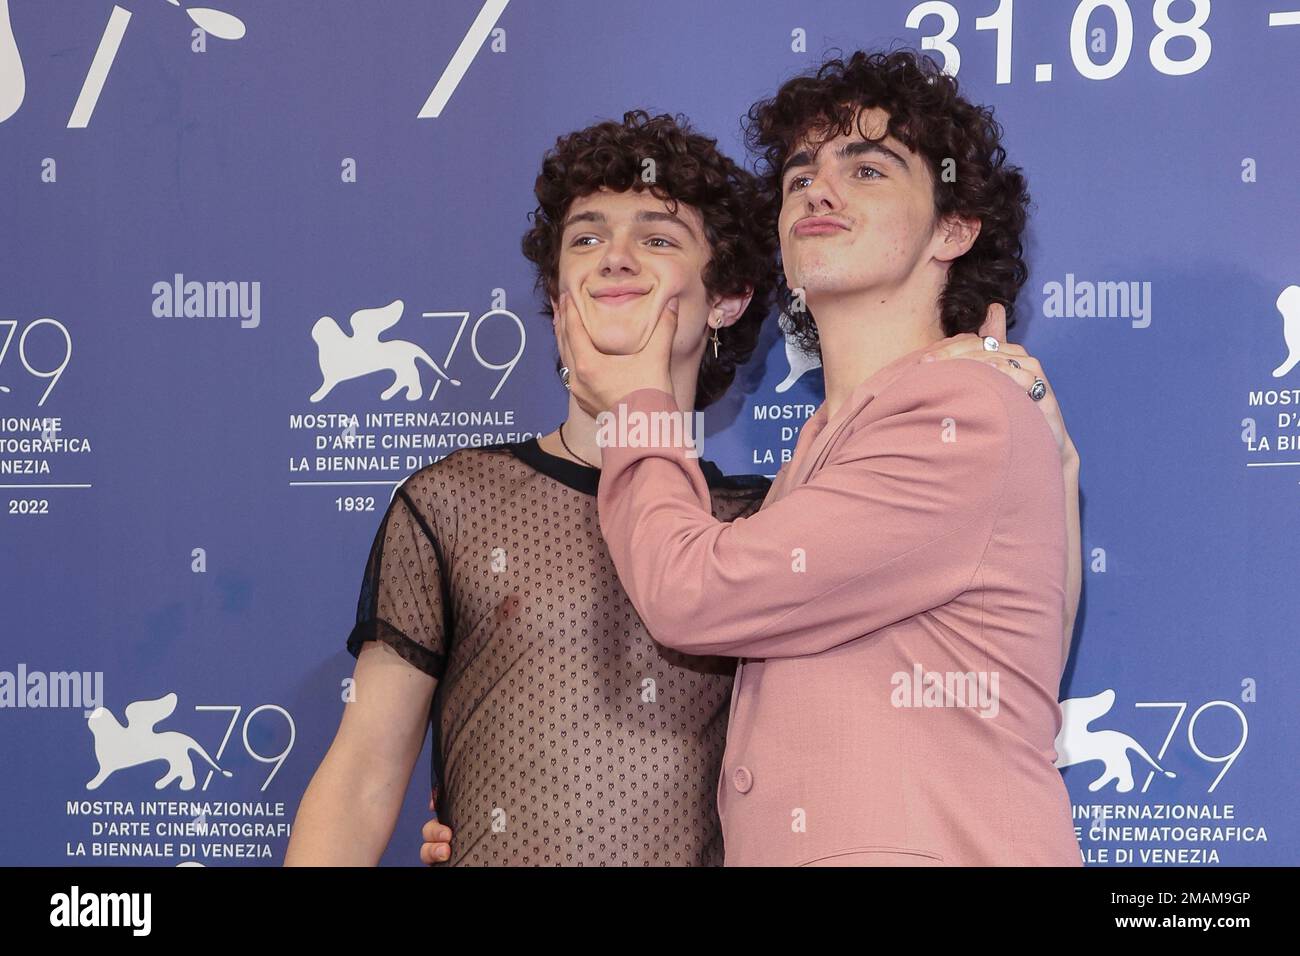 Noah Jupe, left, and Jack Dylan Grazer pose for photographers upon arrival  at the premiere of the film 'Dreamin' Wild' during the 79th edition of the  Venice Film Festival in Venice, Italy,